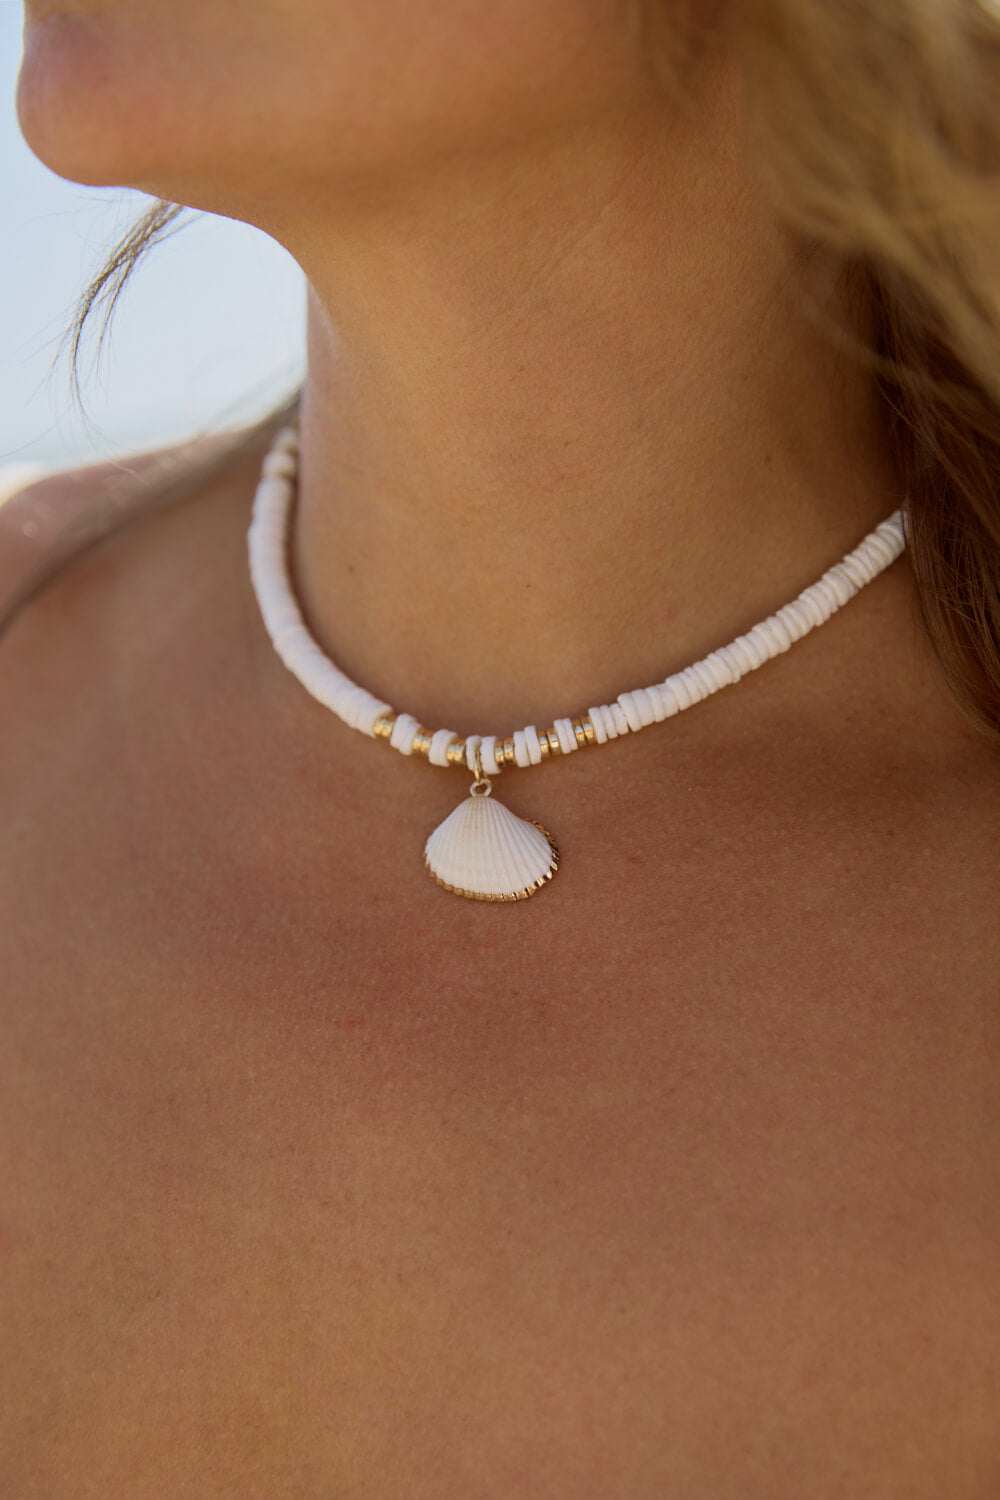 Women's beachy white and gold necklace with gold details